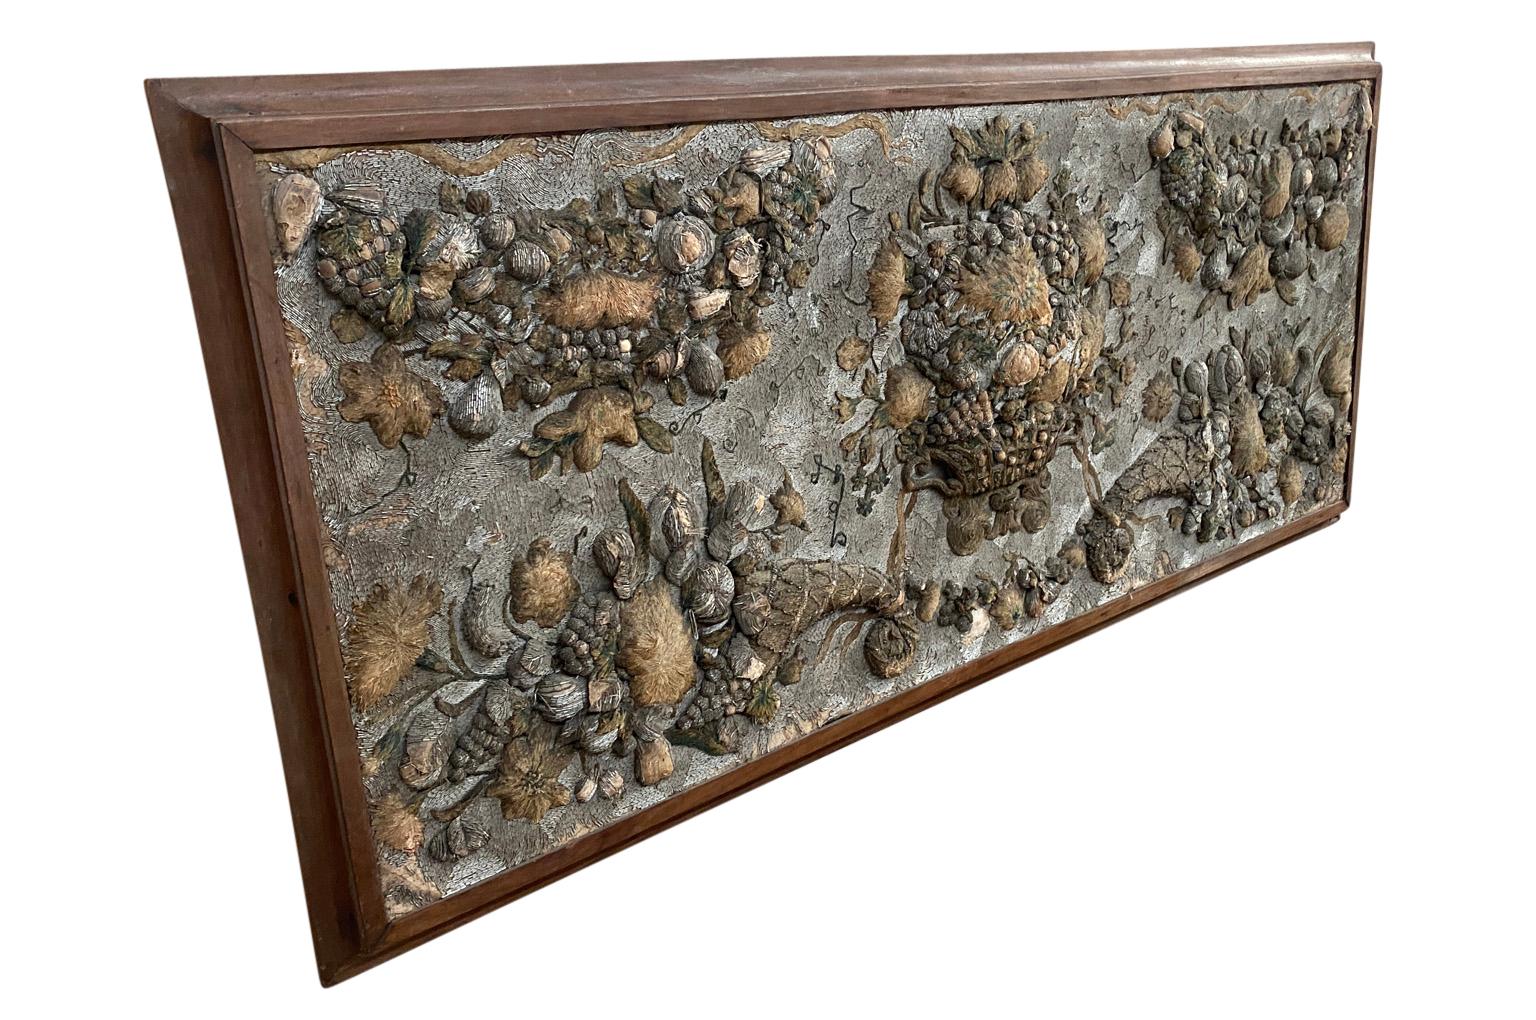 A stunning and monumental 17th century stump work - Embroidery Panel from Venice, Italy. Exquisitely crafted with silks and metallic thread and beading - housed in a wooden frame. A magnificent art piece or perfect incorporated into a headboard.